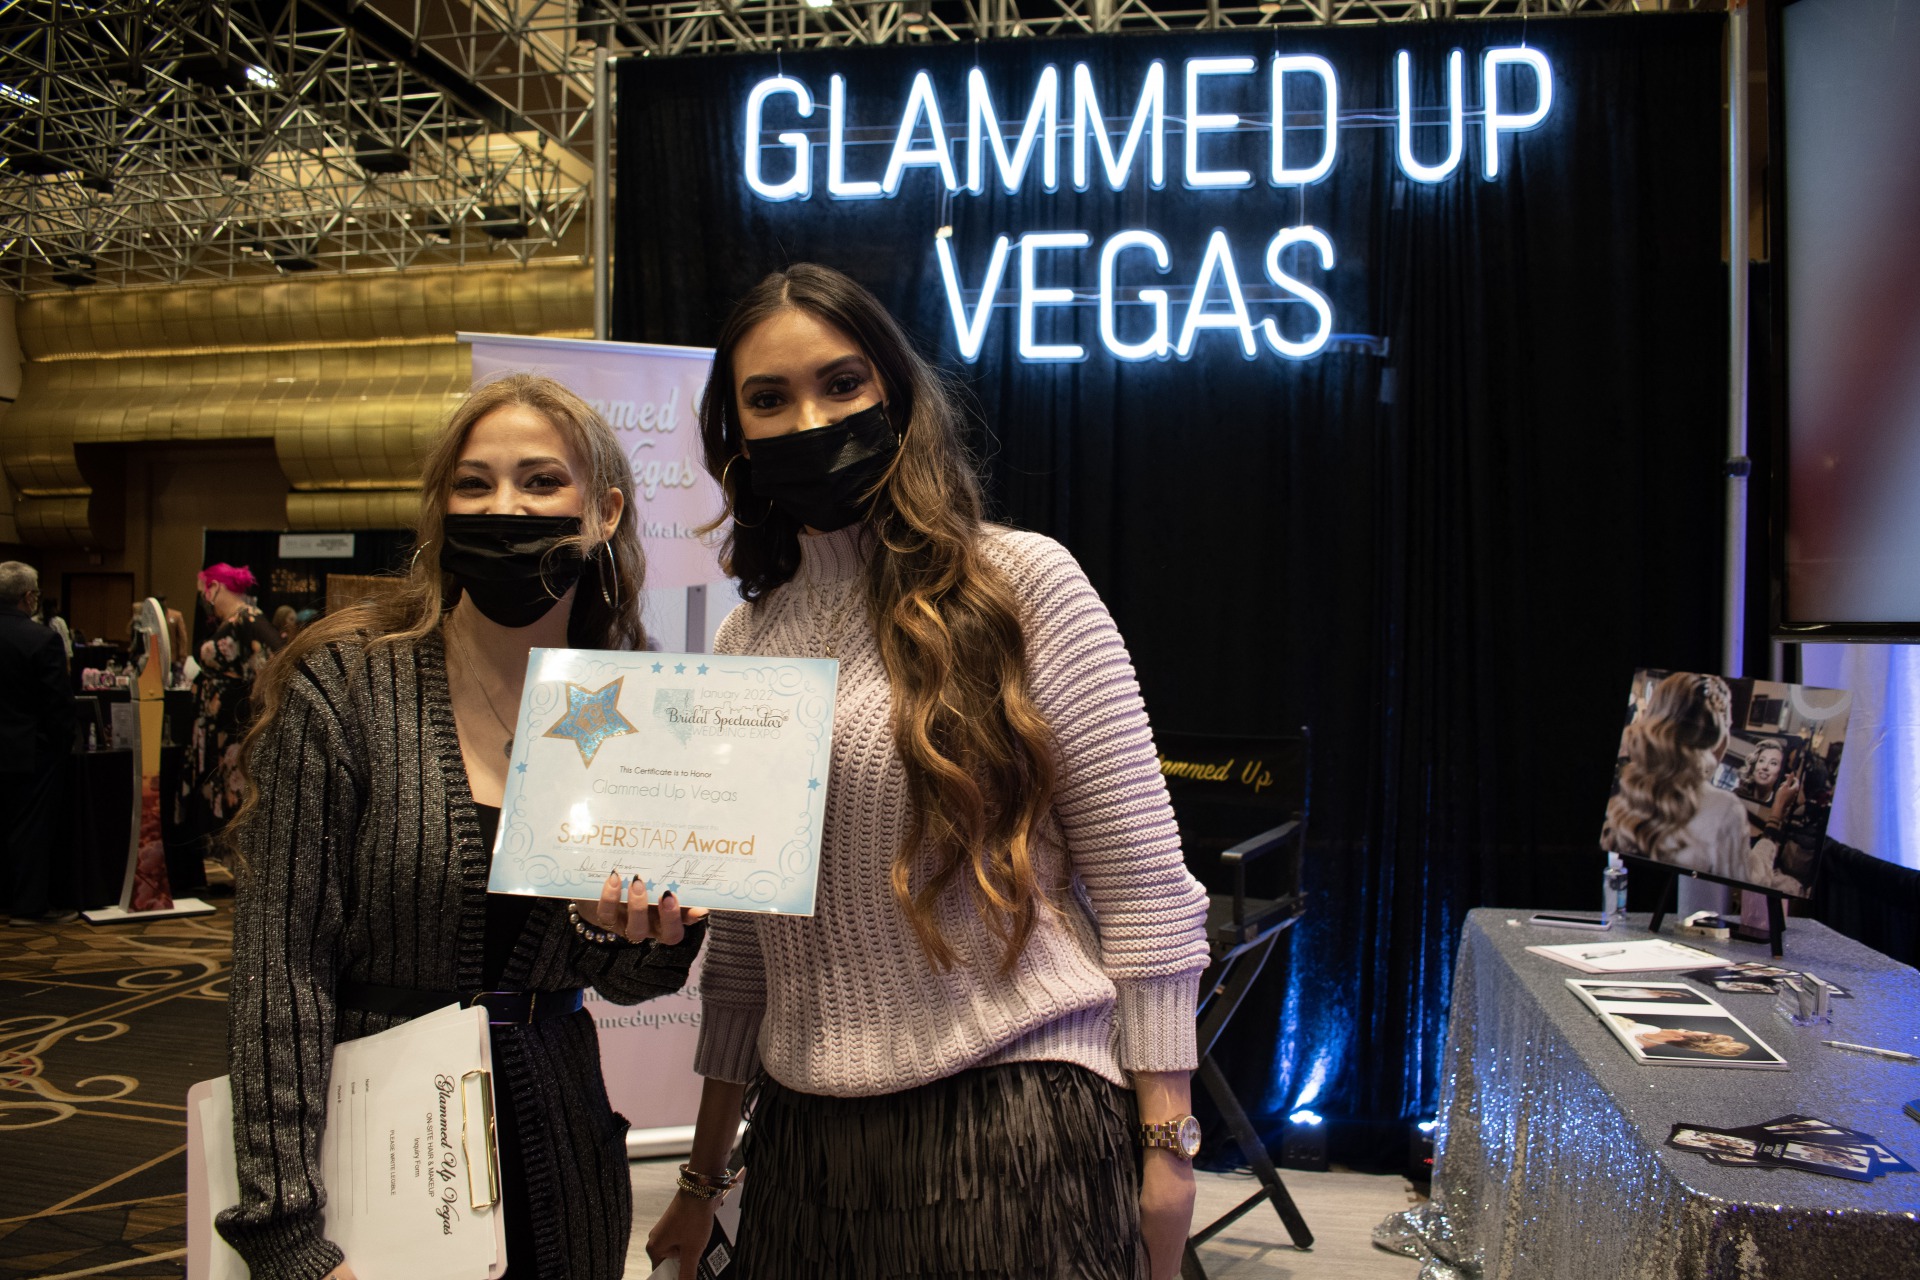 The lovely ladies at Glammed Up Vegas receive their star award